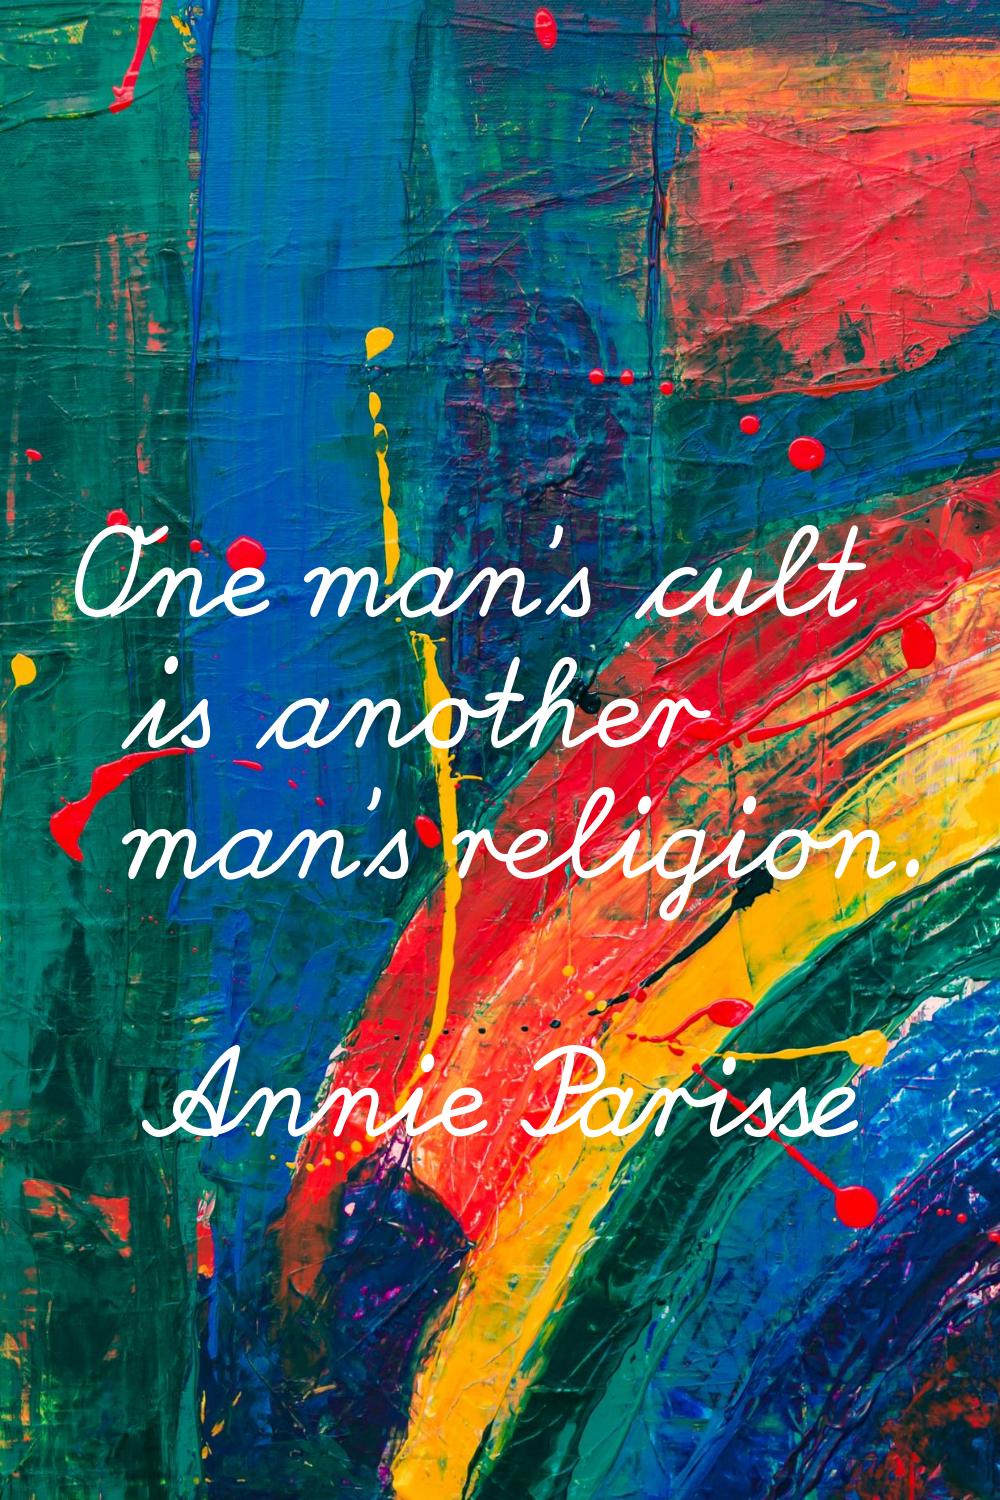 One man's cult is another man's religion.